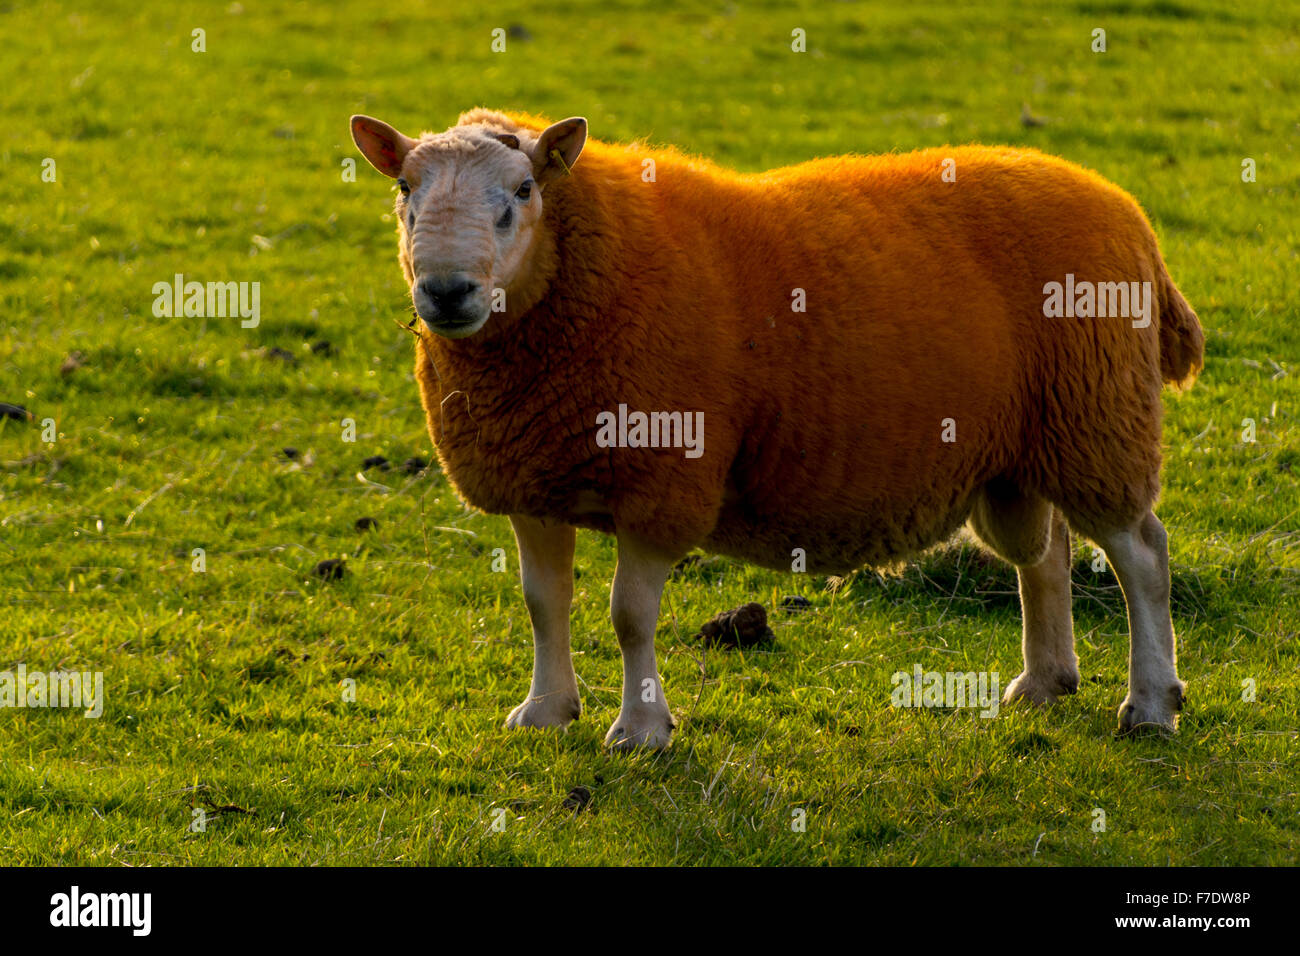 A ram that has been dyed orange, in a field near Balnahard, Isle of Mull, Argyll and Bute, Scotland UK. Stock Photo